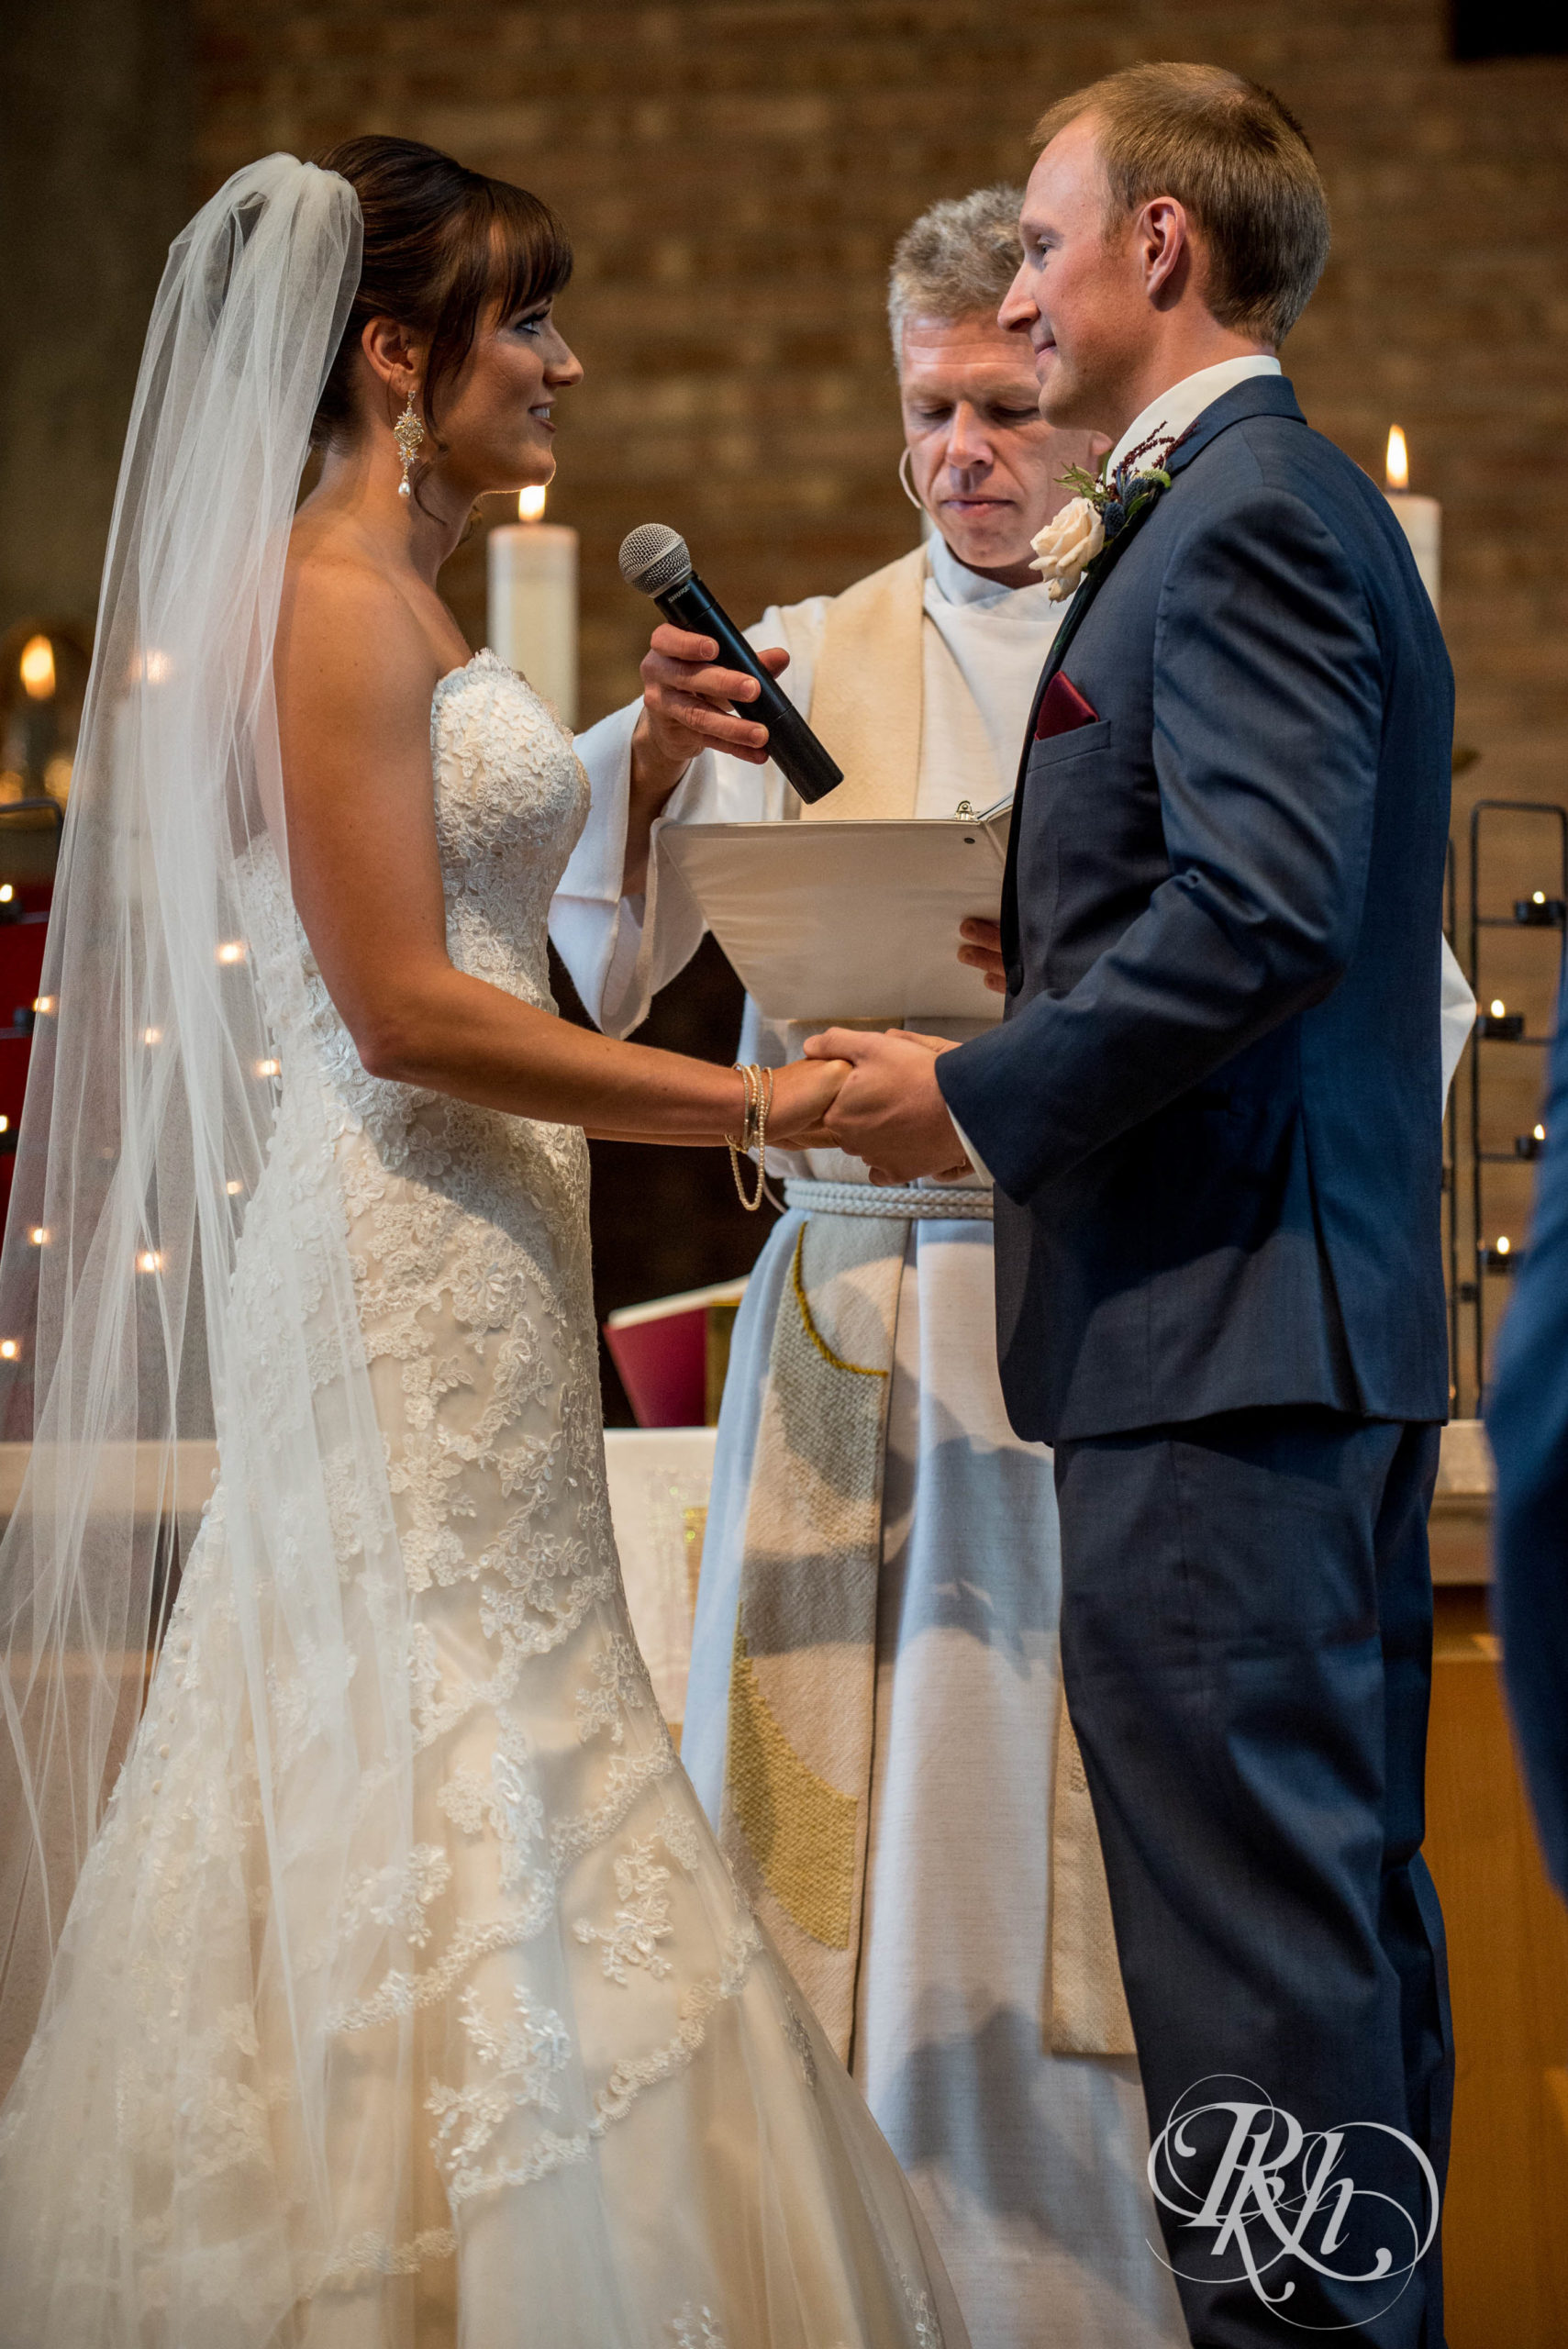 Bride and groom say vows at church wedding ceremony in Minneapolis, Minnesota.